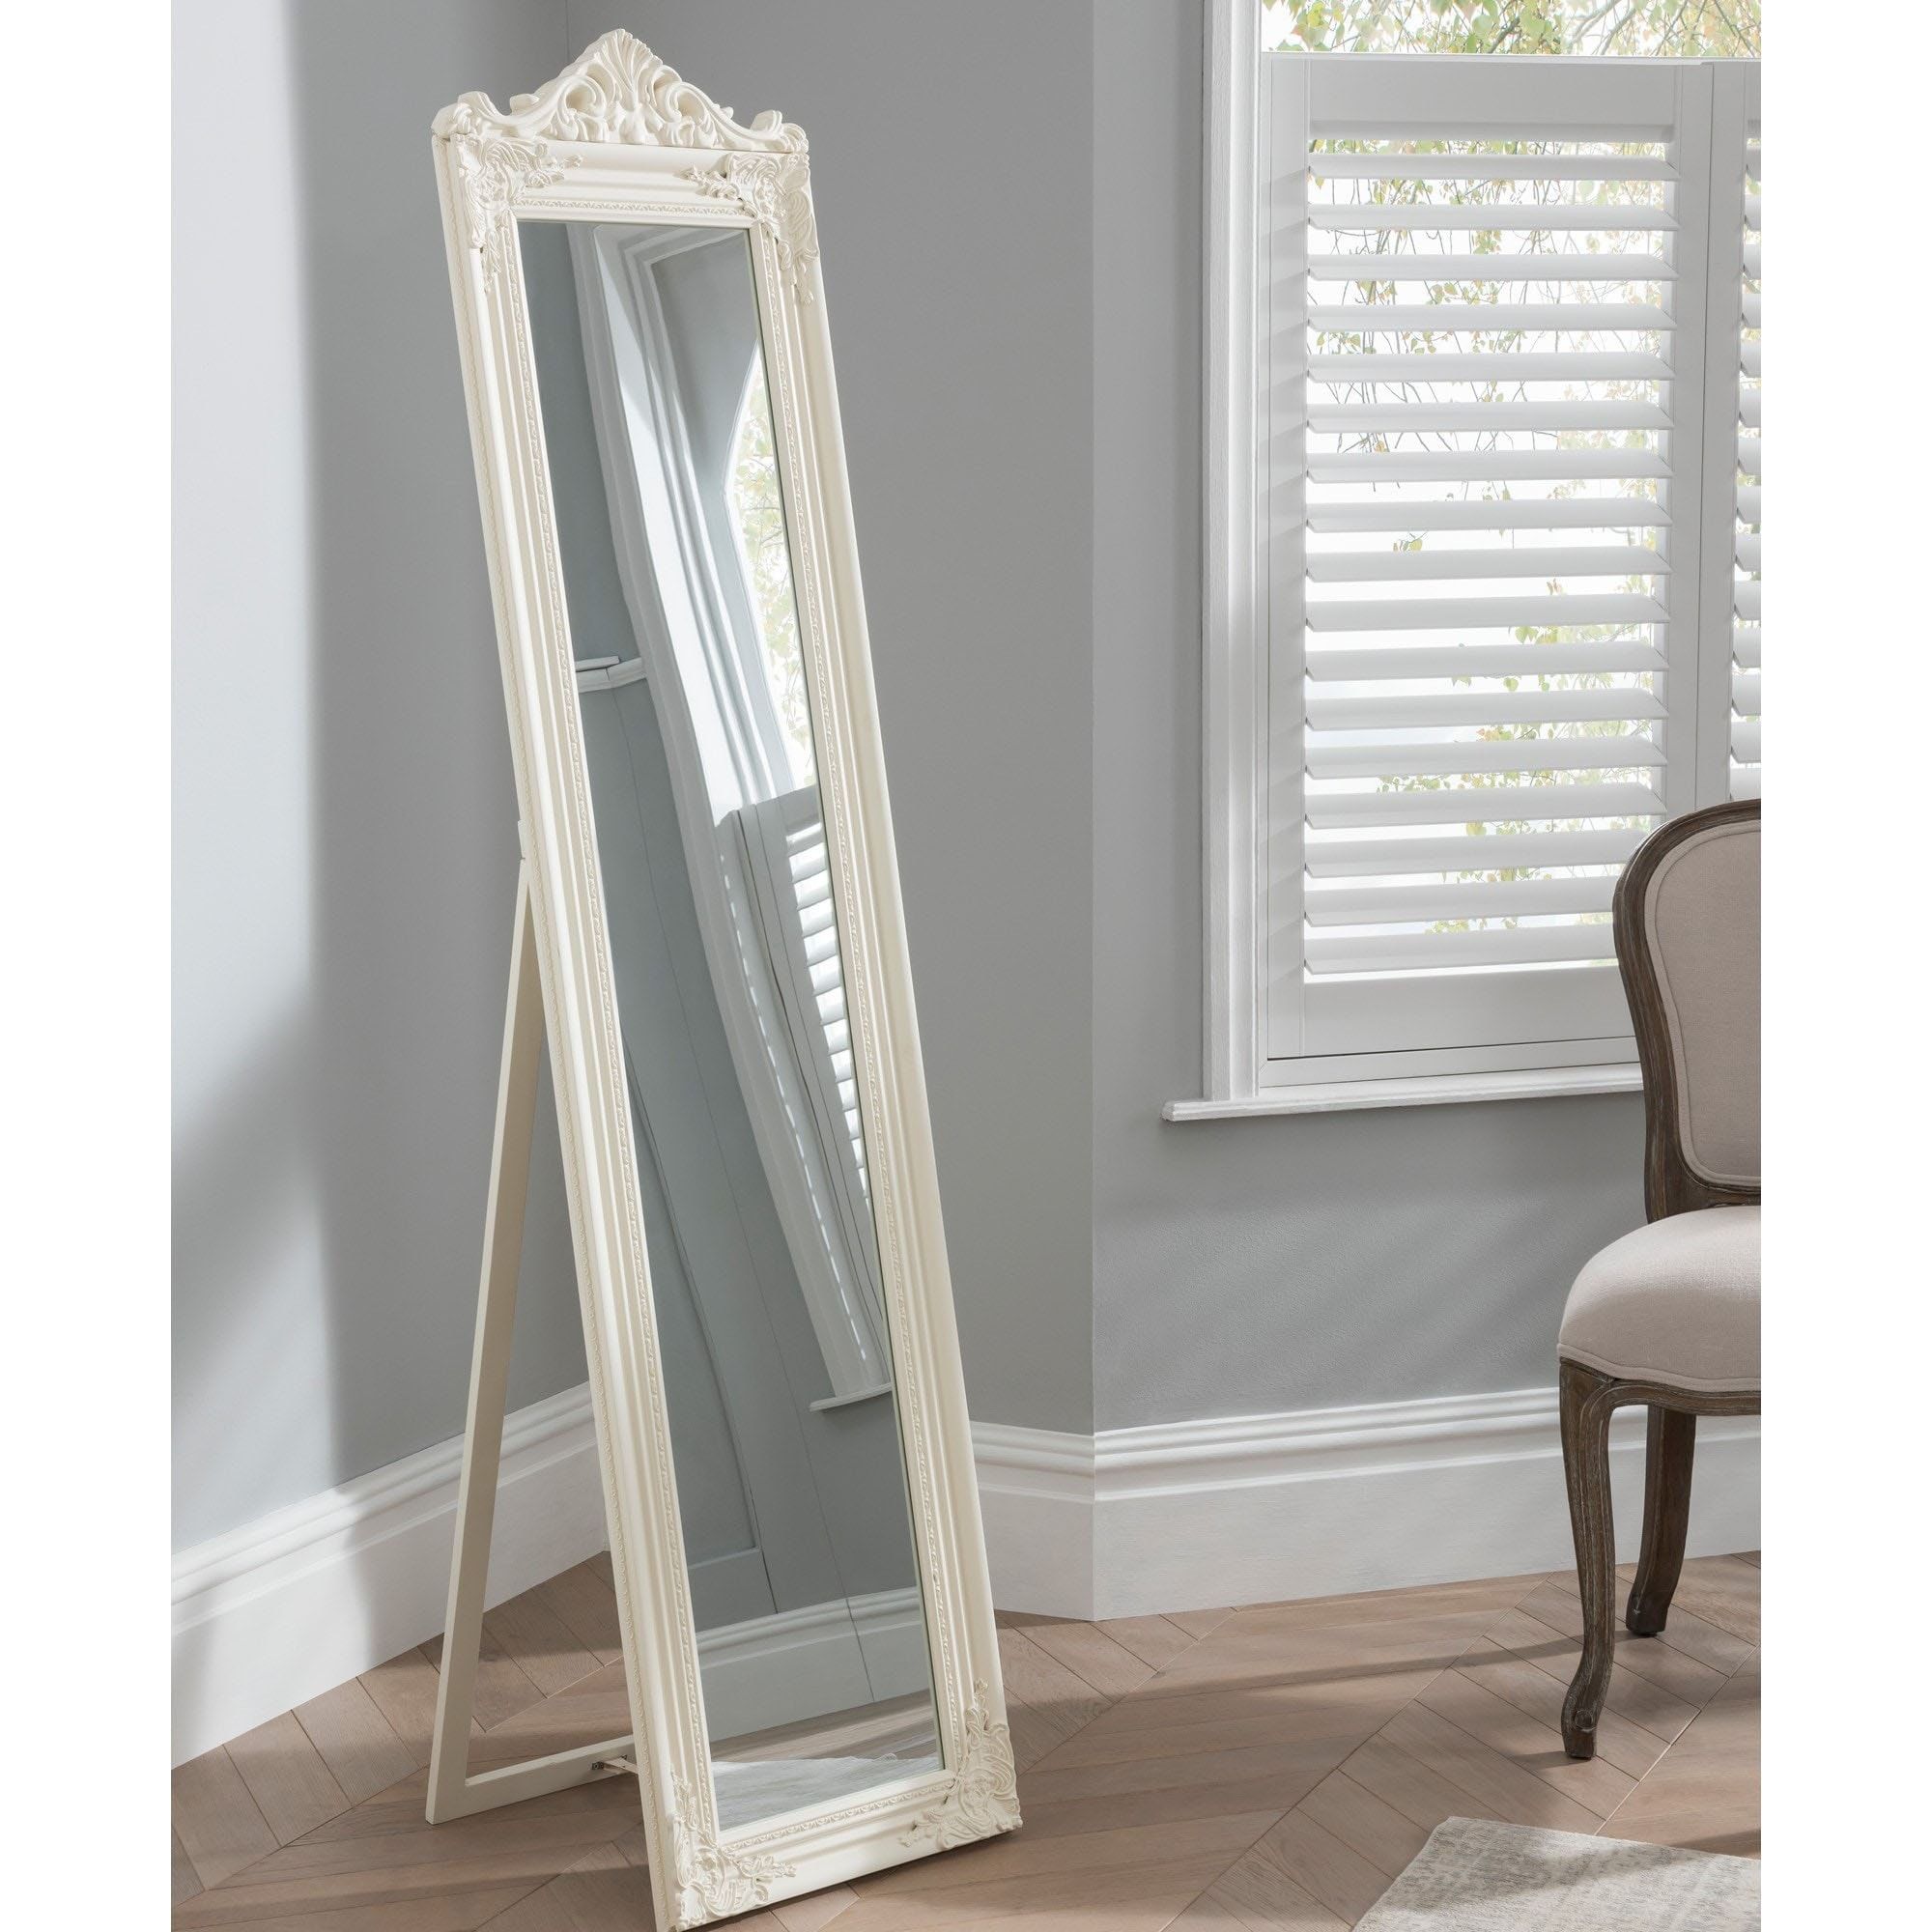 Full Length Mirror In Cream The Elizabeth Floor Standing Mirror With Dark Mahogany Full Length Mirrors (View 3 of 15)